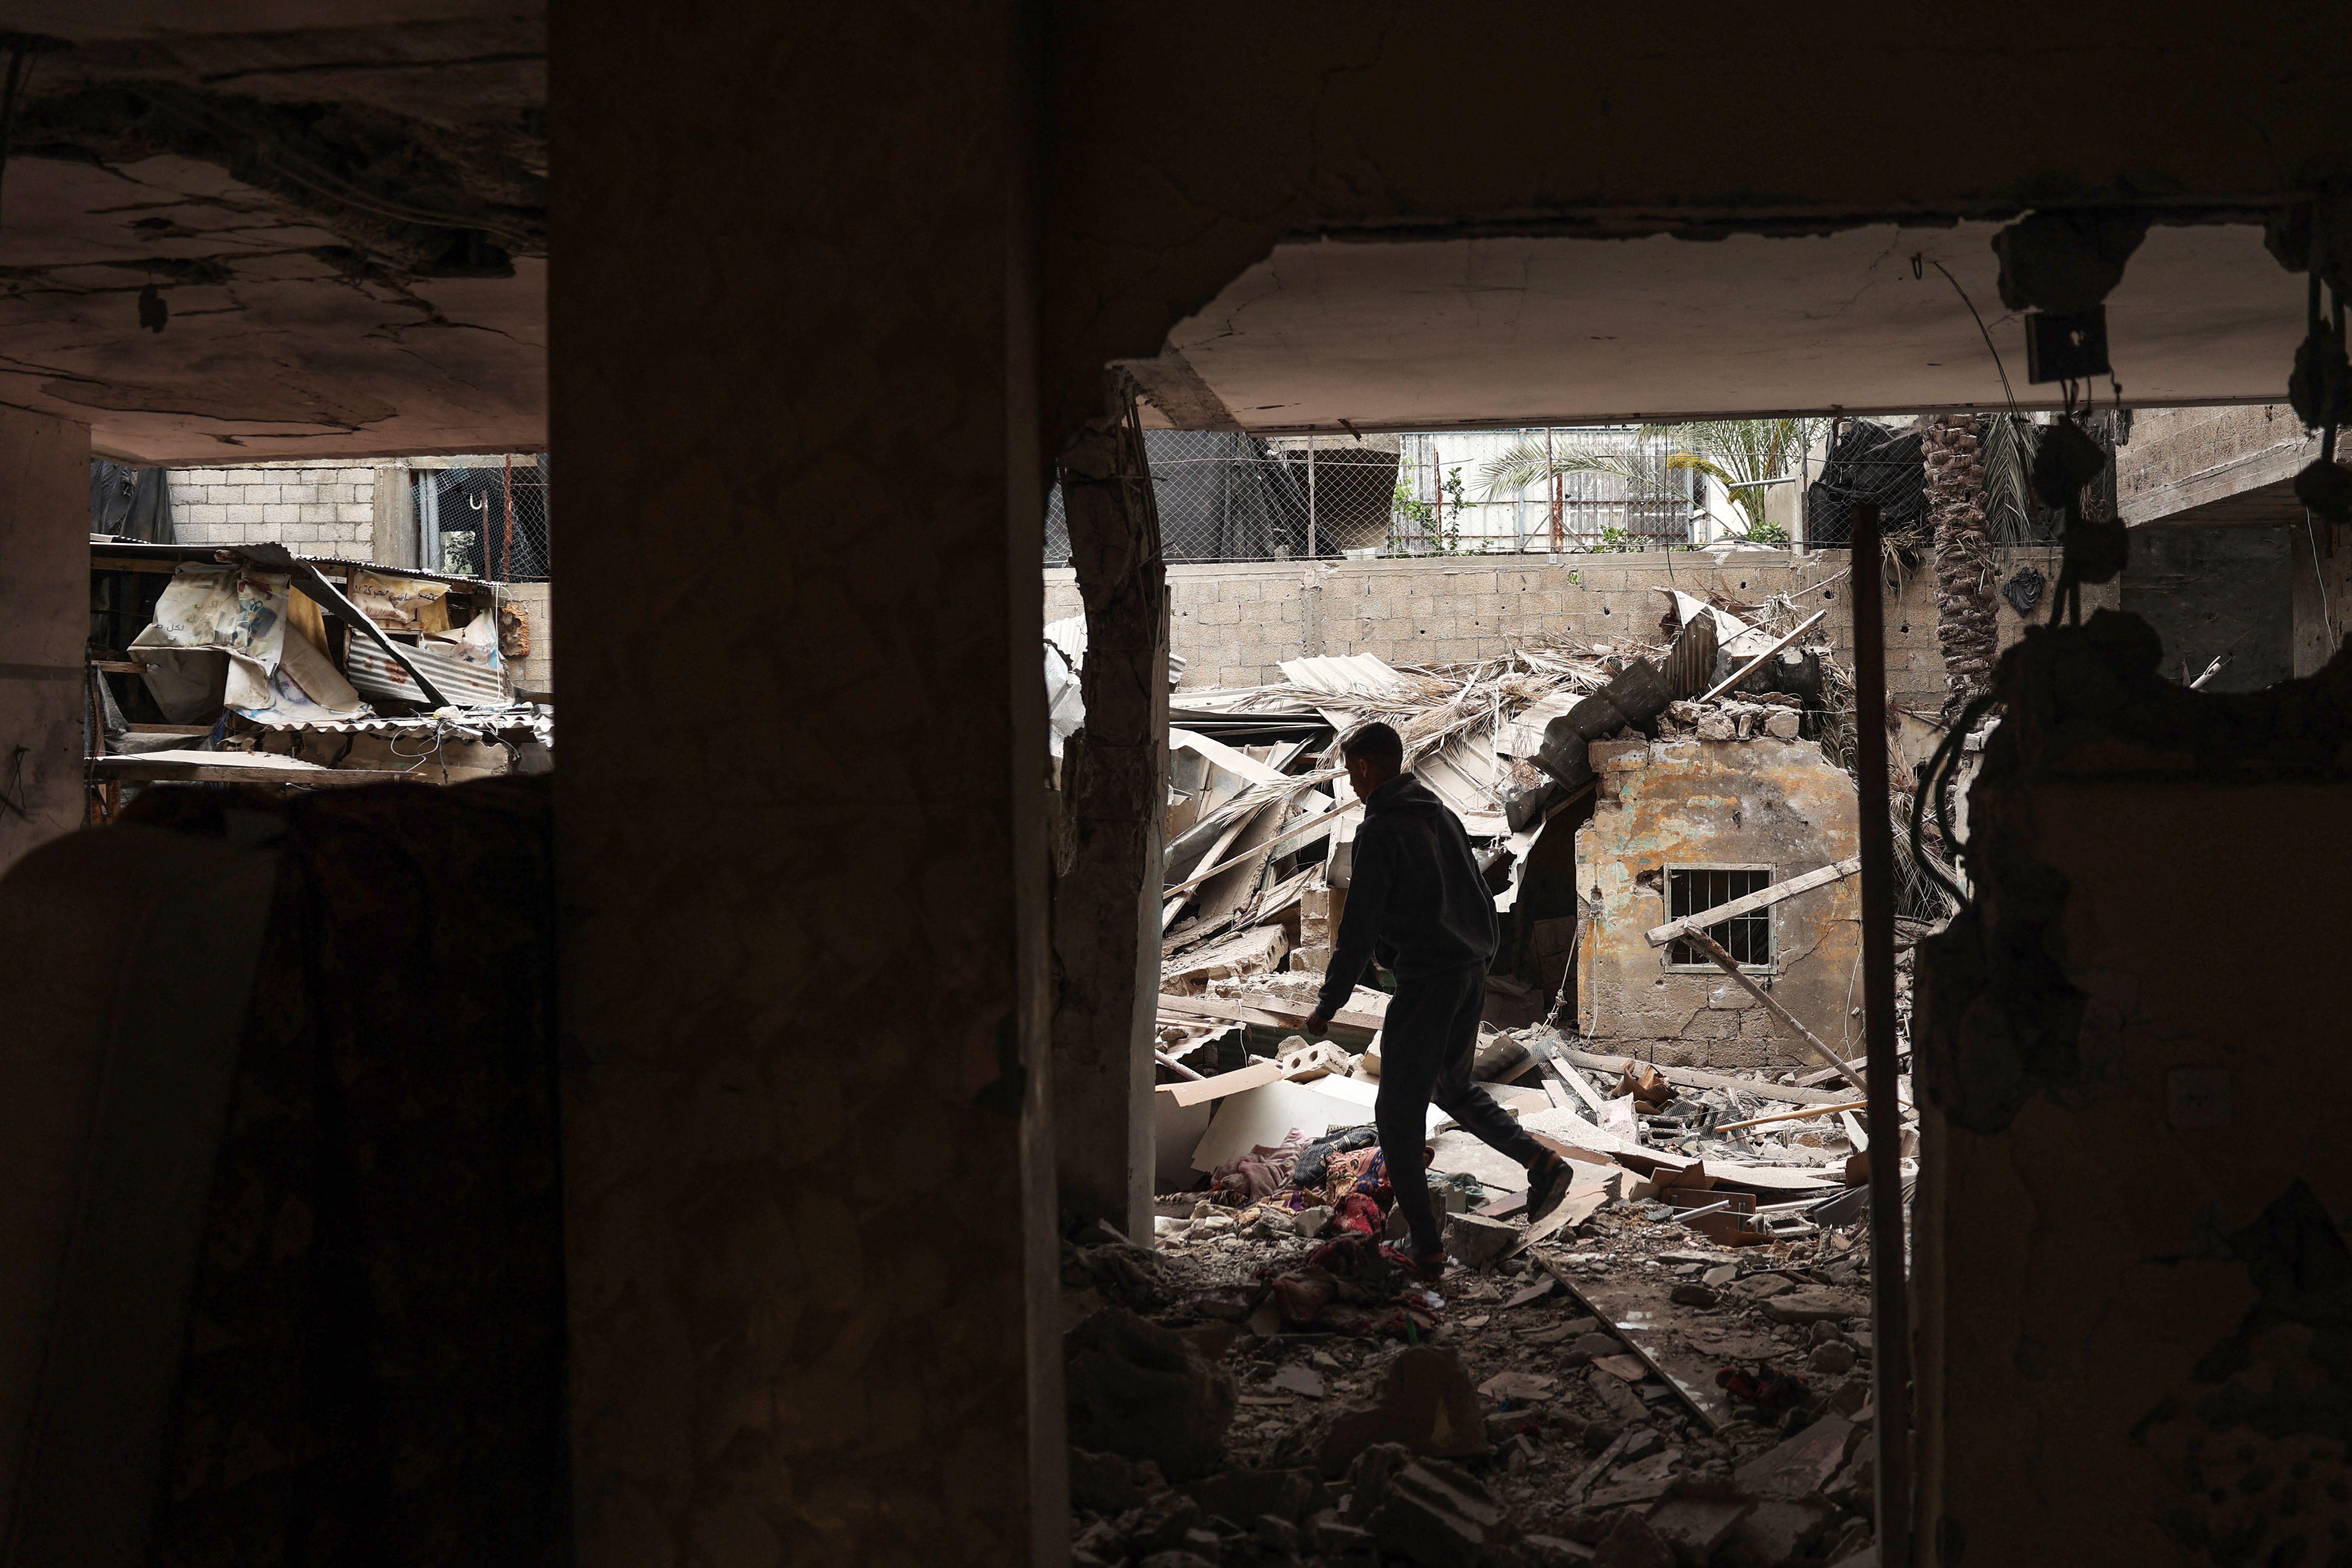 What occurred during the raid on Central Gaza in Rafah?